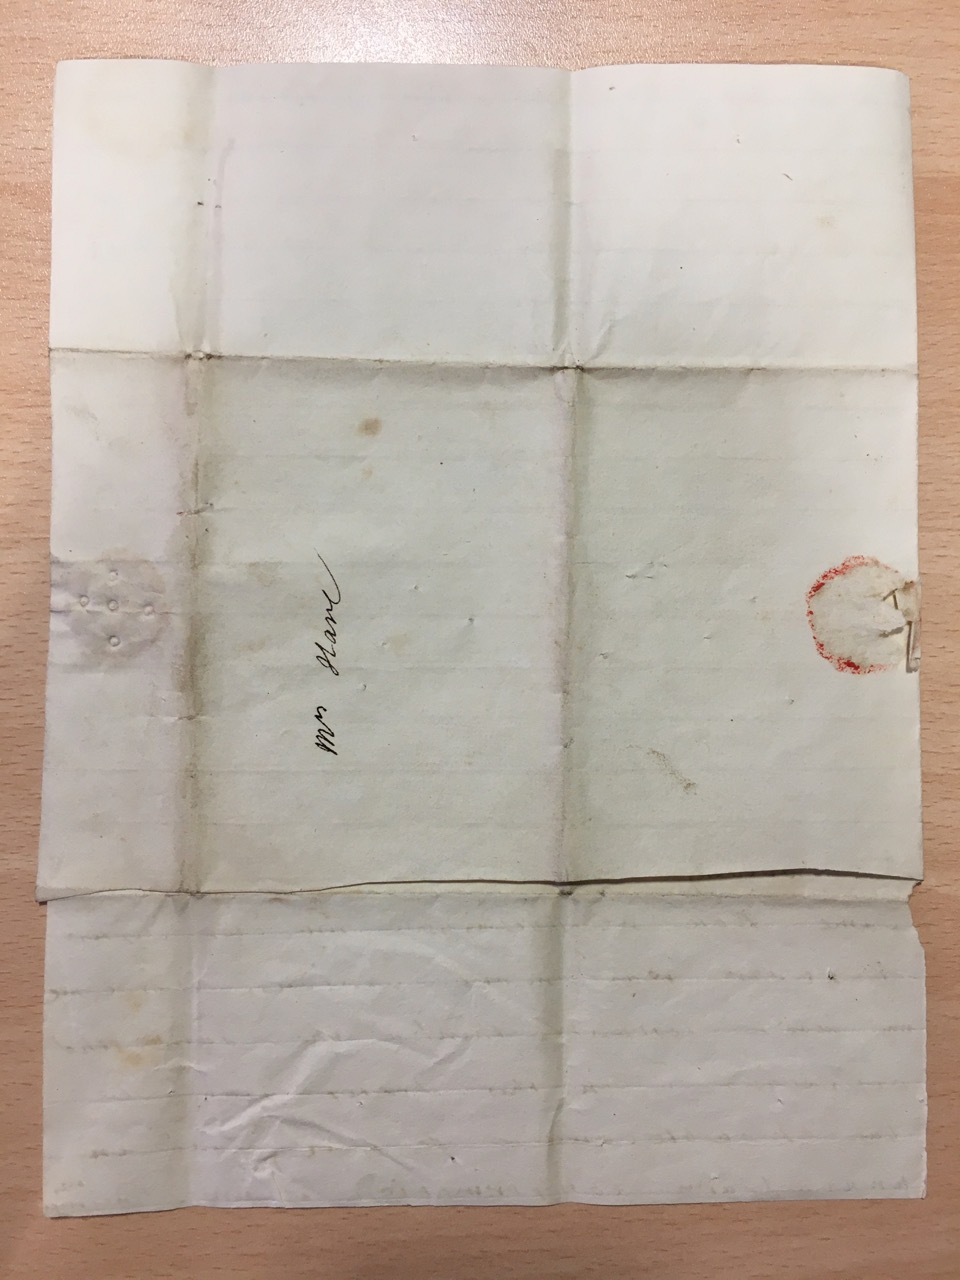 Image #3 of letter: Elizabeth Hare to Ann Hare, undated